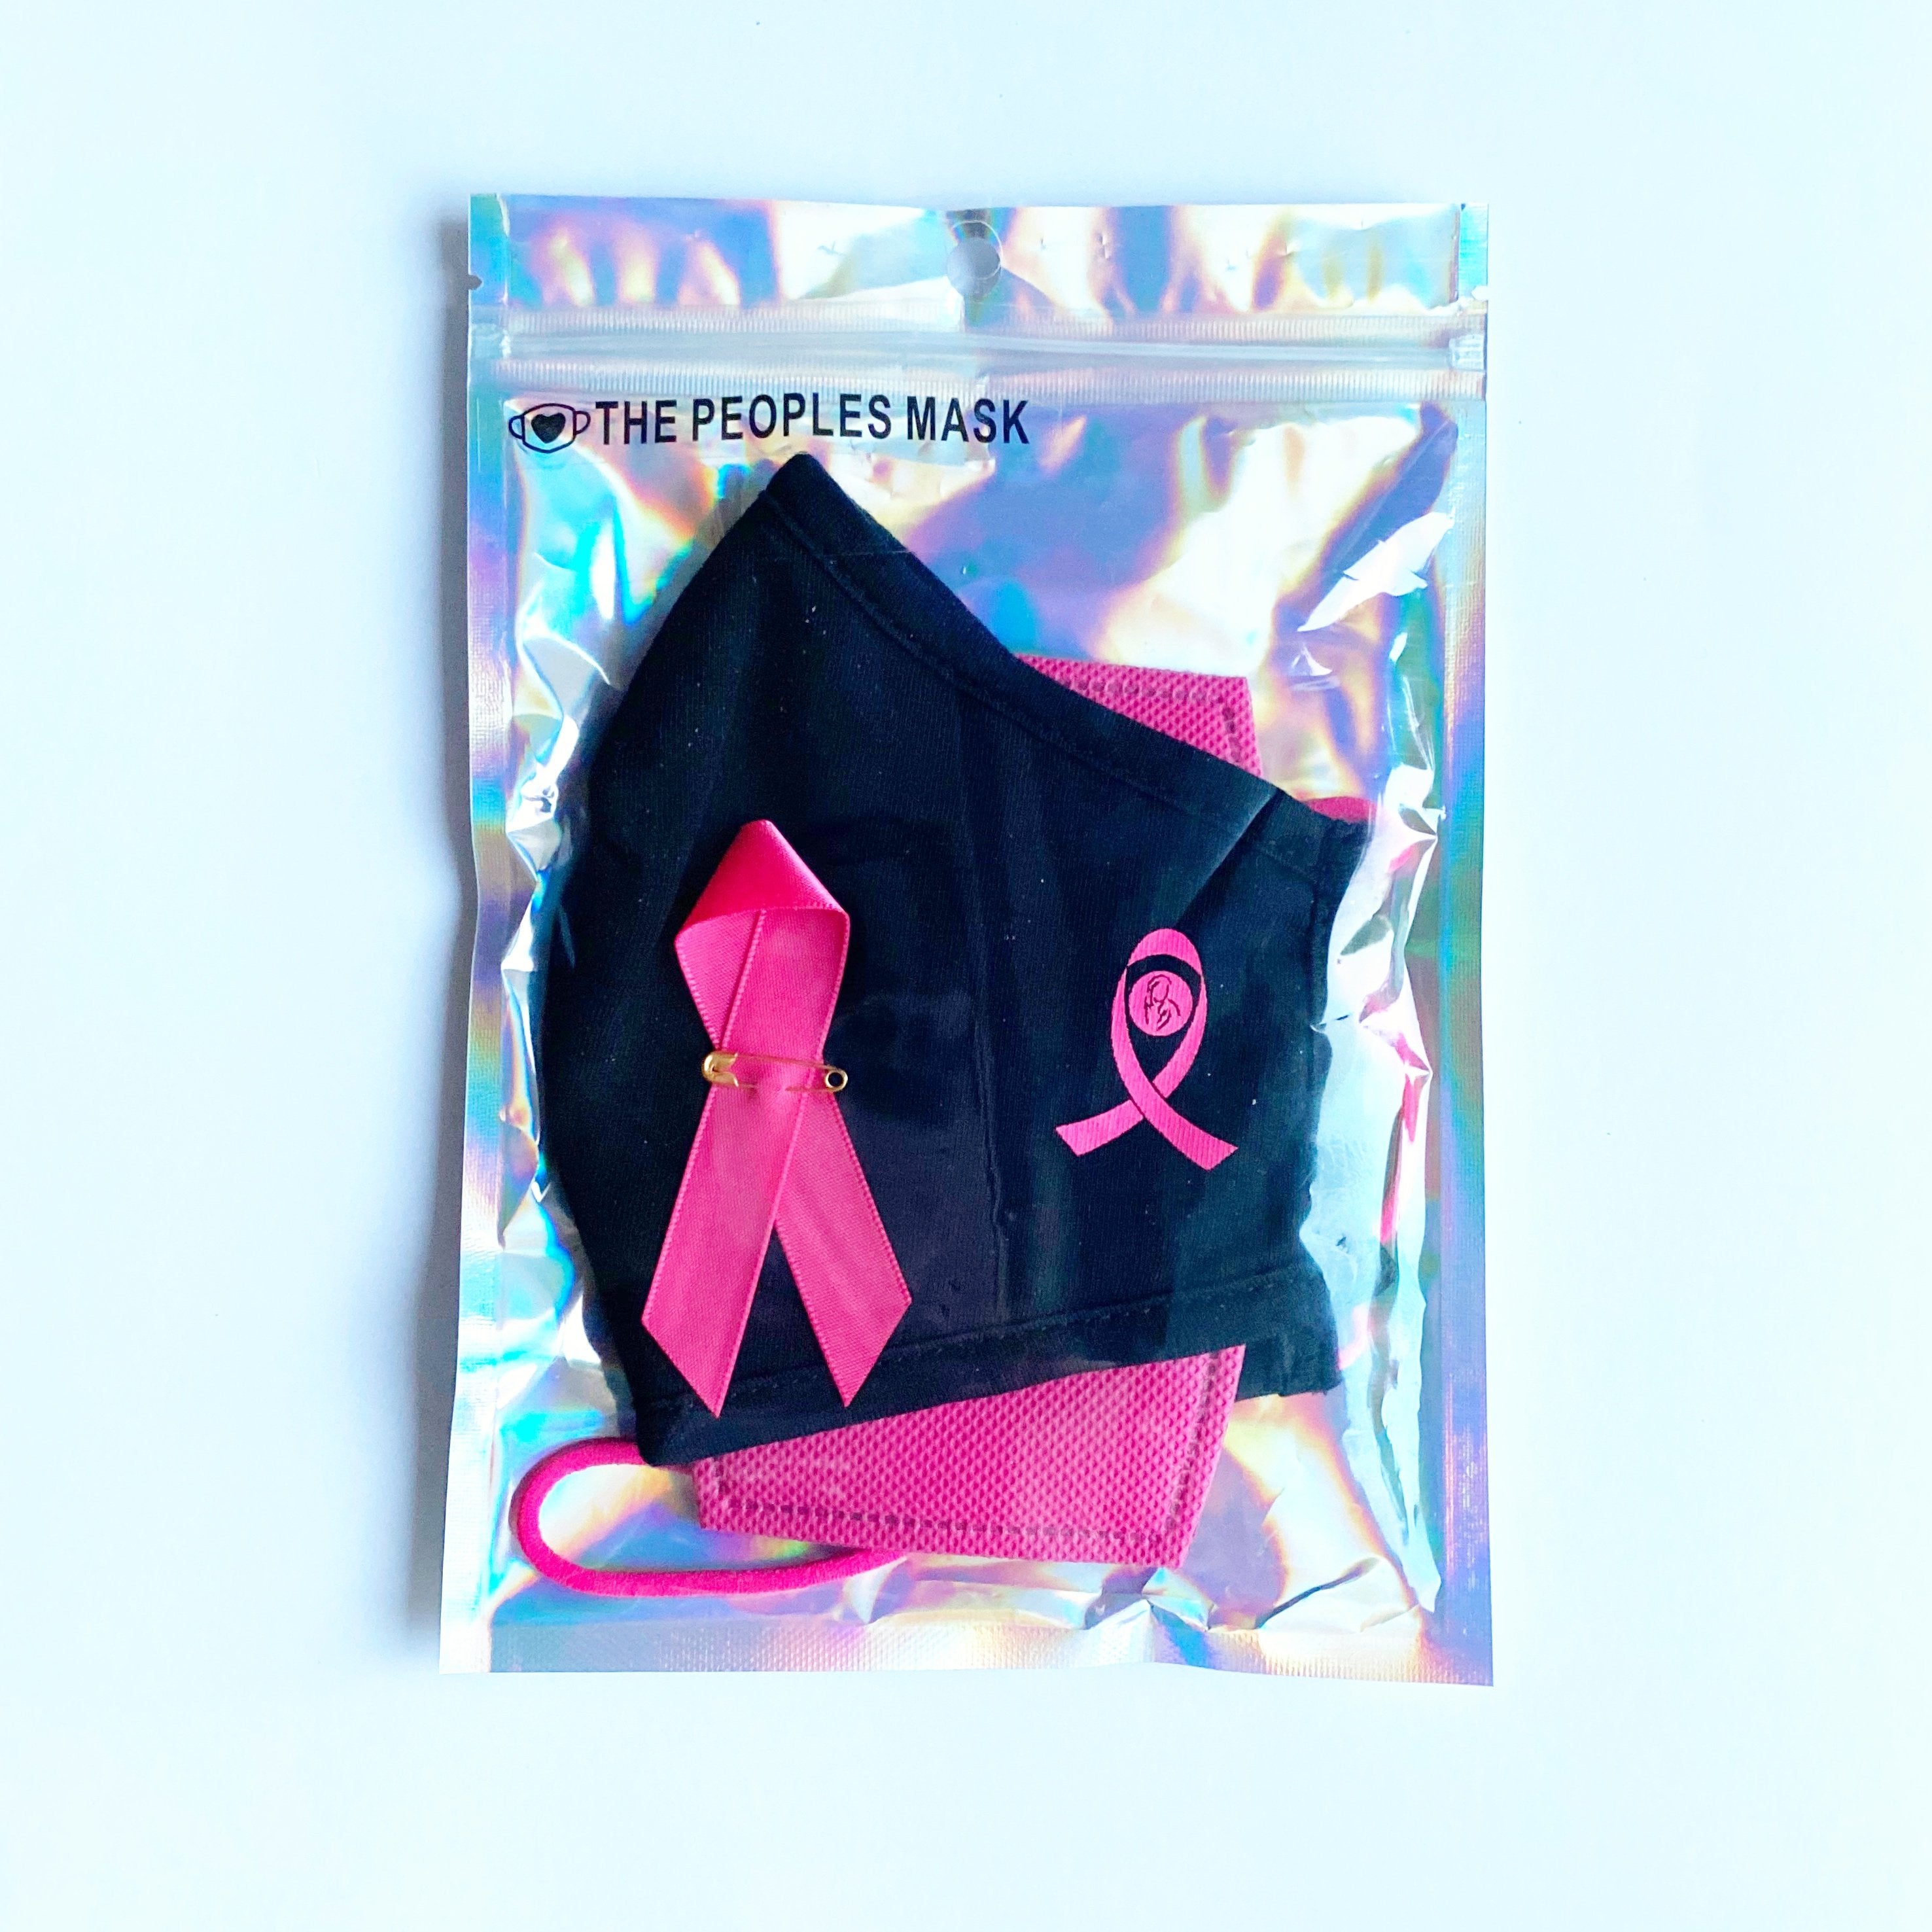 The Breast Cancer Society of Canada Pink Ribbon Face Mask